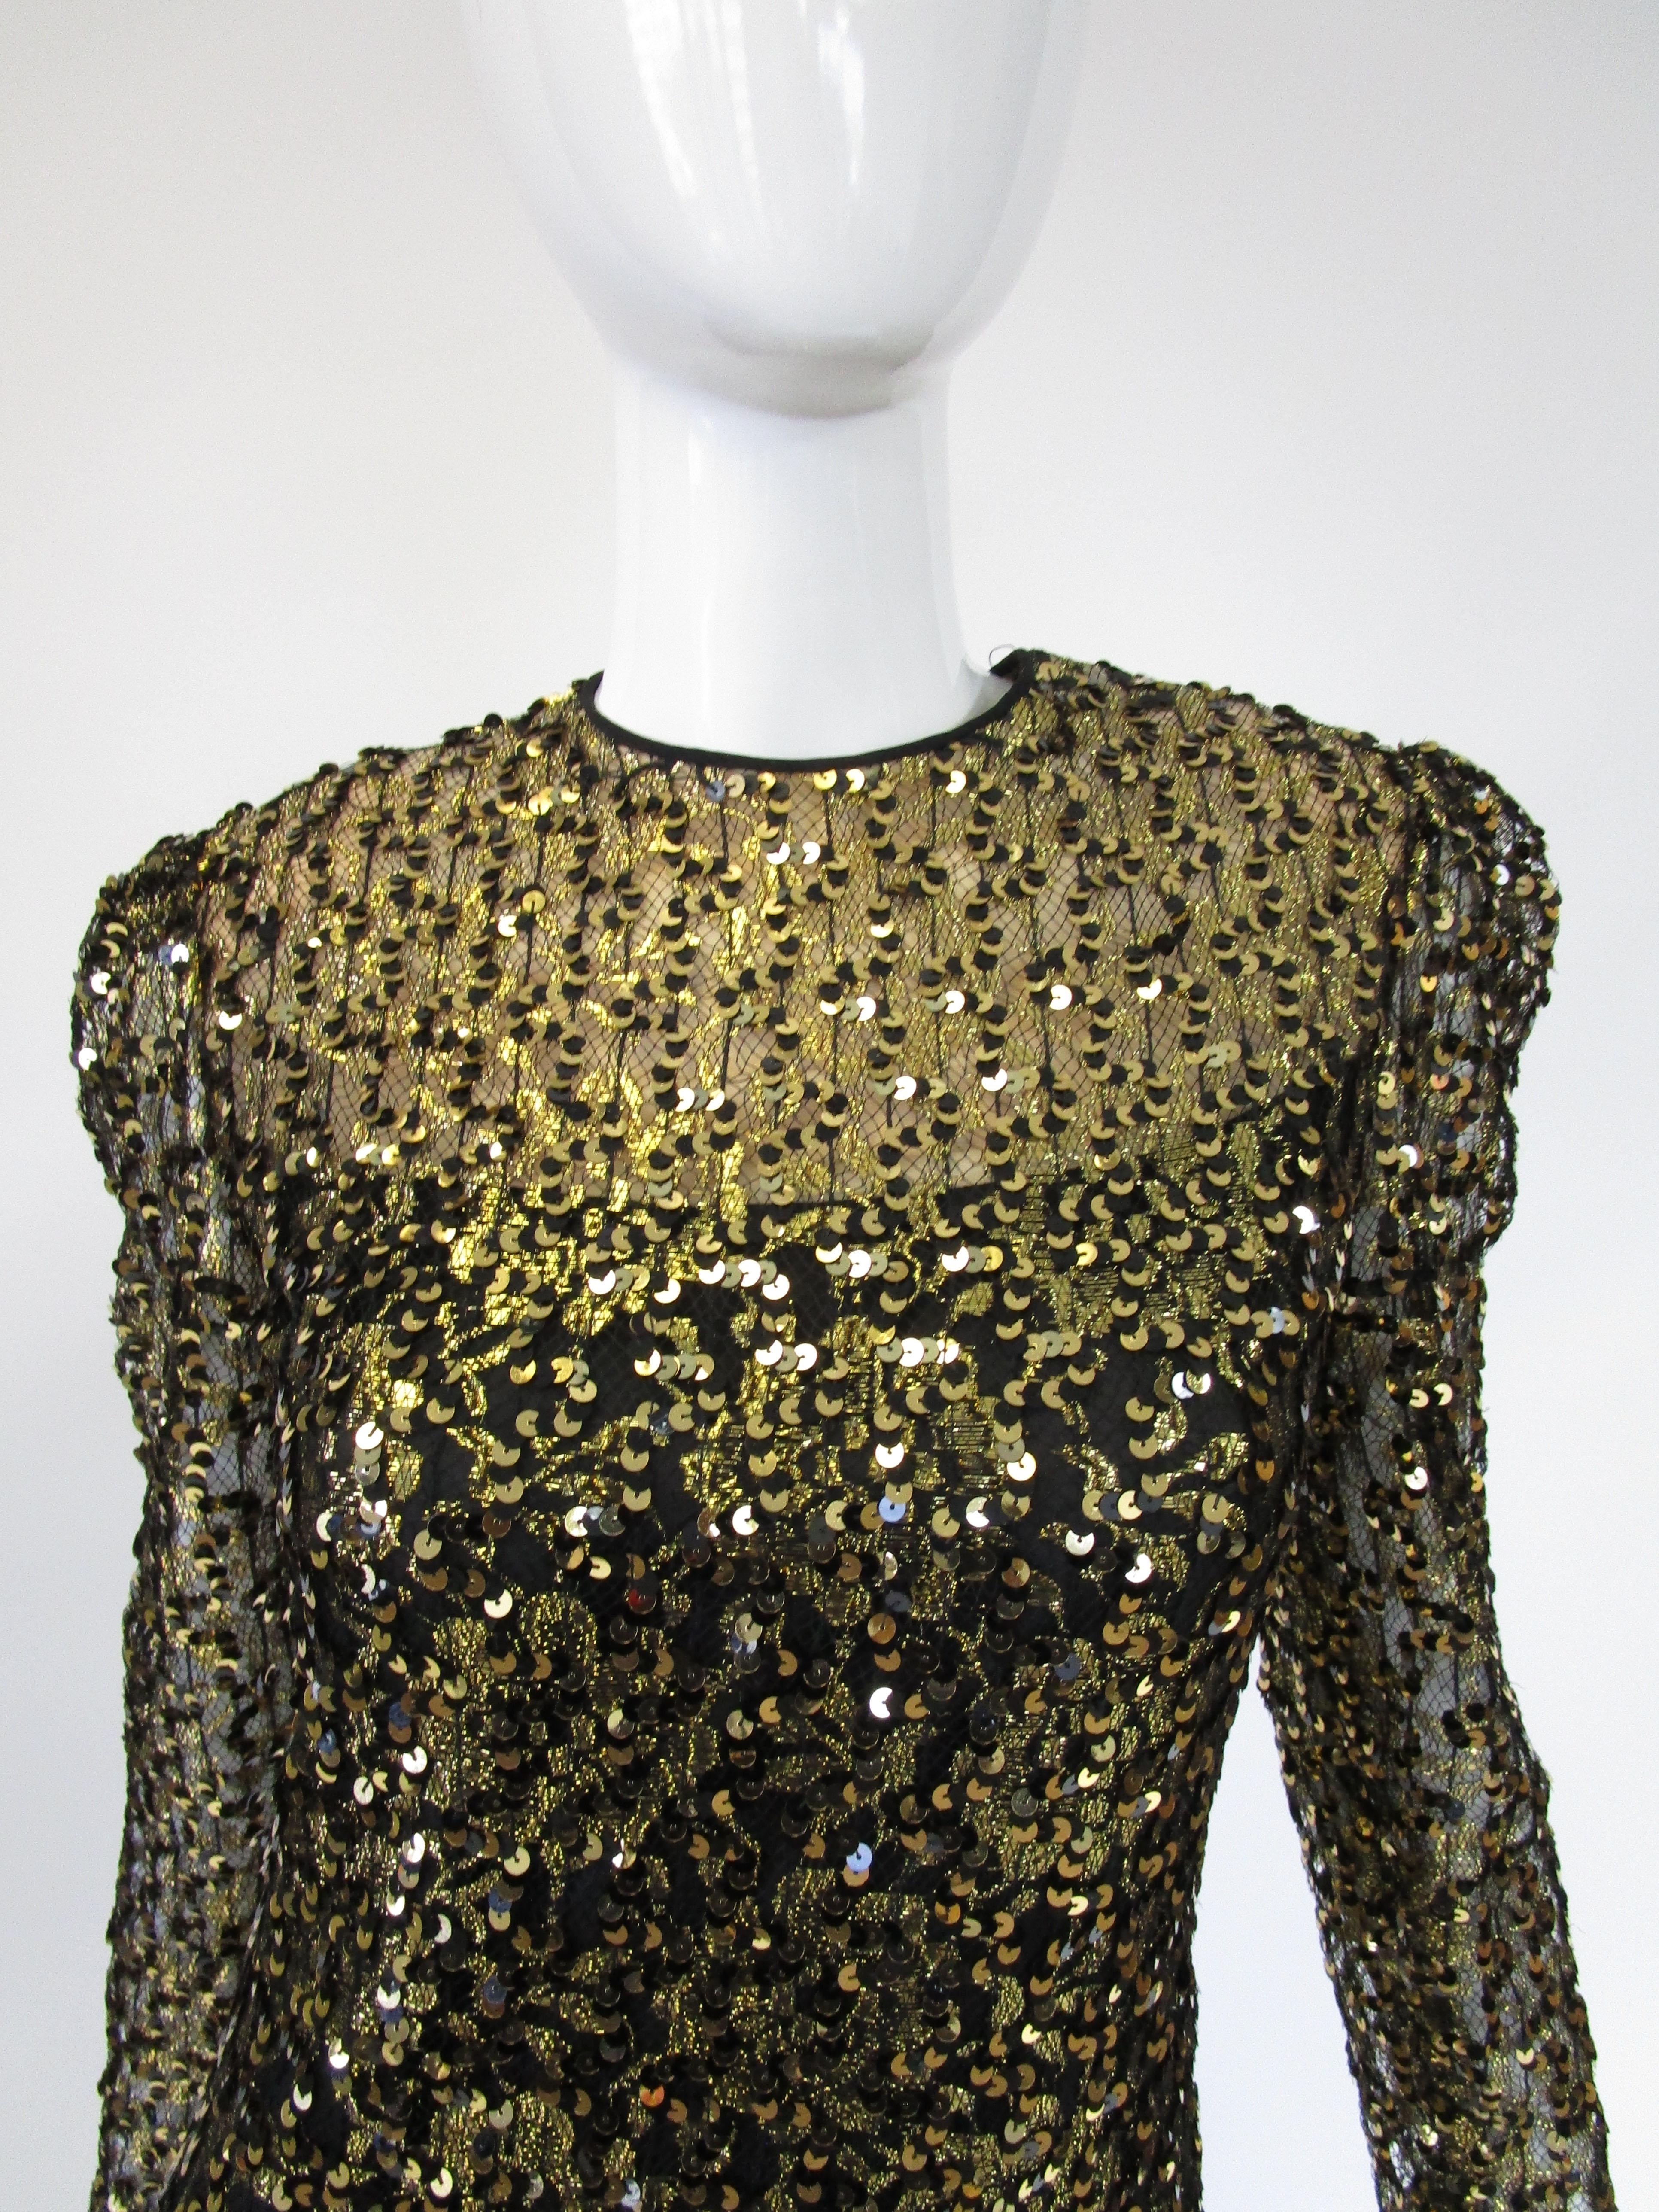 
Simply beautiful sequined evening dress by Richilene. This dress features a glimmering body of gold and black sequins that fit snugly around the wearers body, the lower portion of the dress is gusseted with black chiffon that drapes graciously